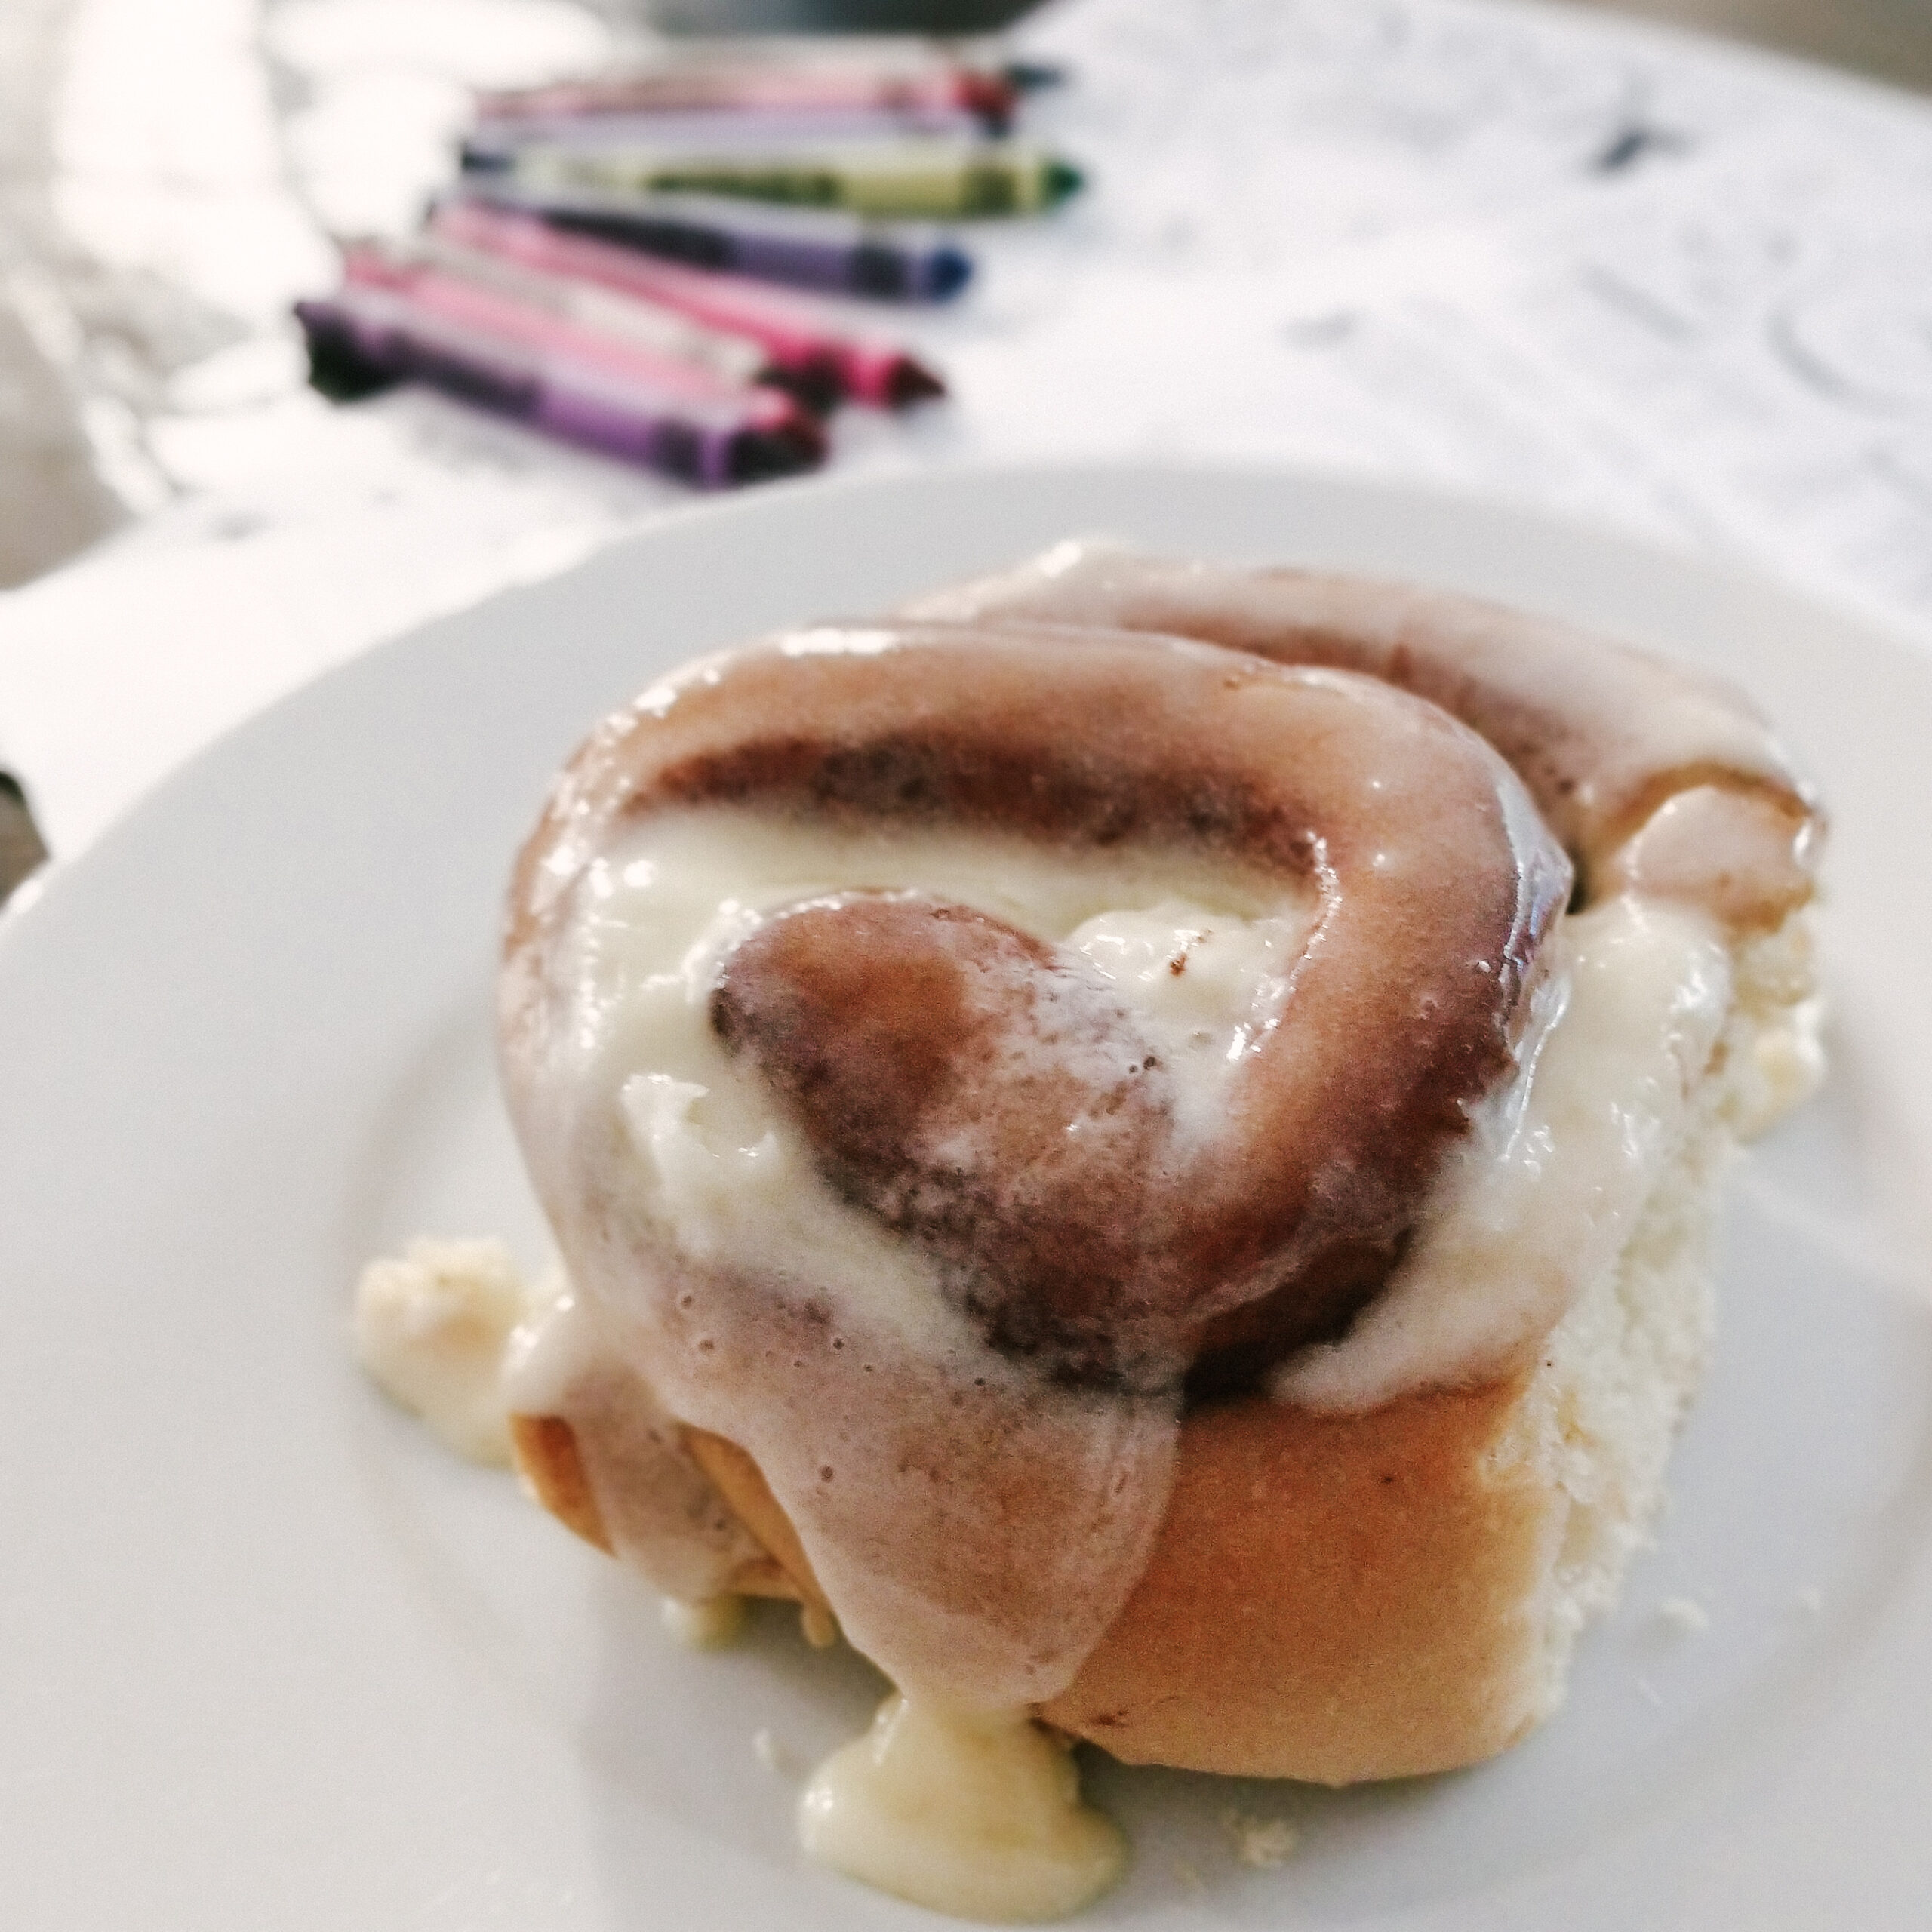 cinnamon roll with journaling supplies in background